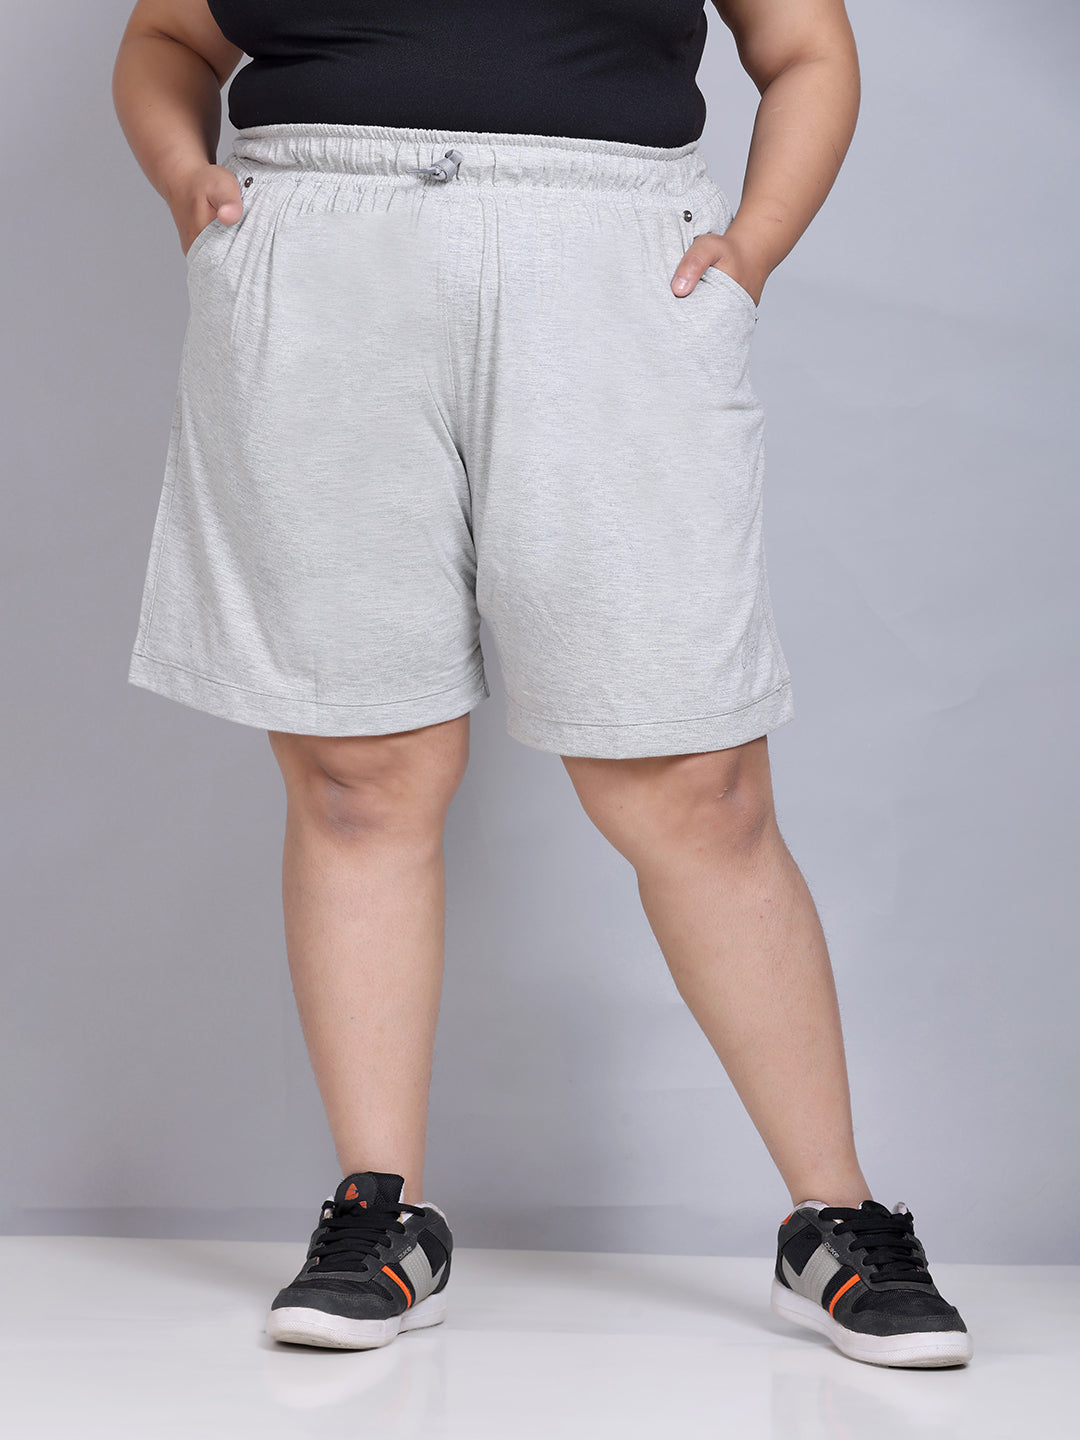 Comfortable Cotton Shorts For Women In Grey Online In India(Plain Bermuda)